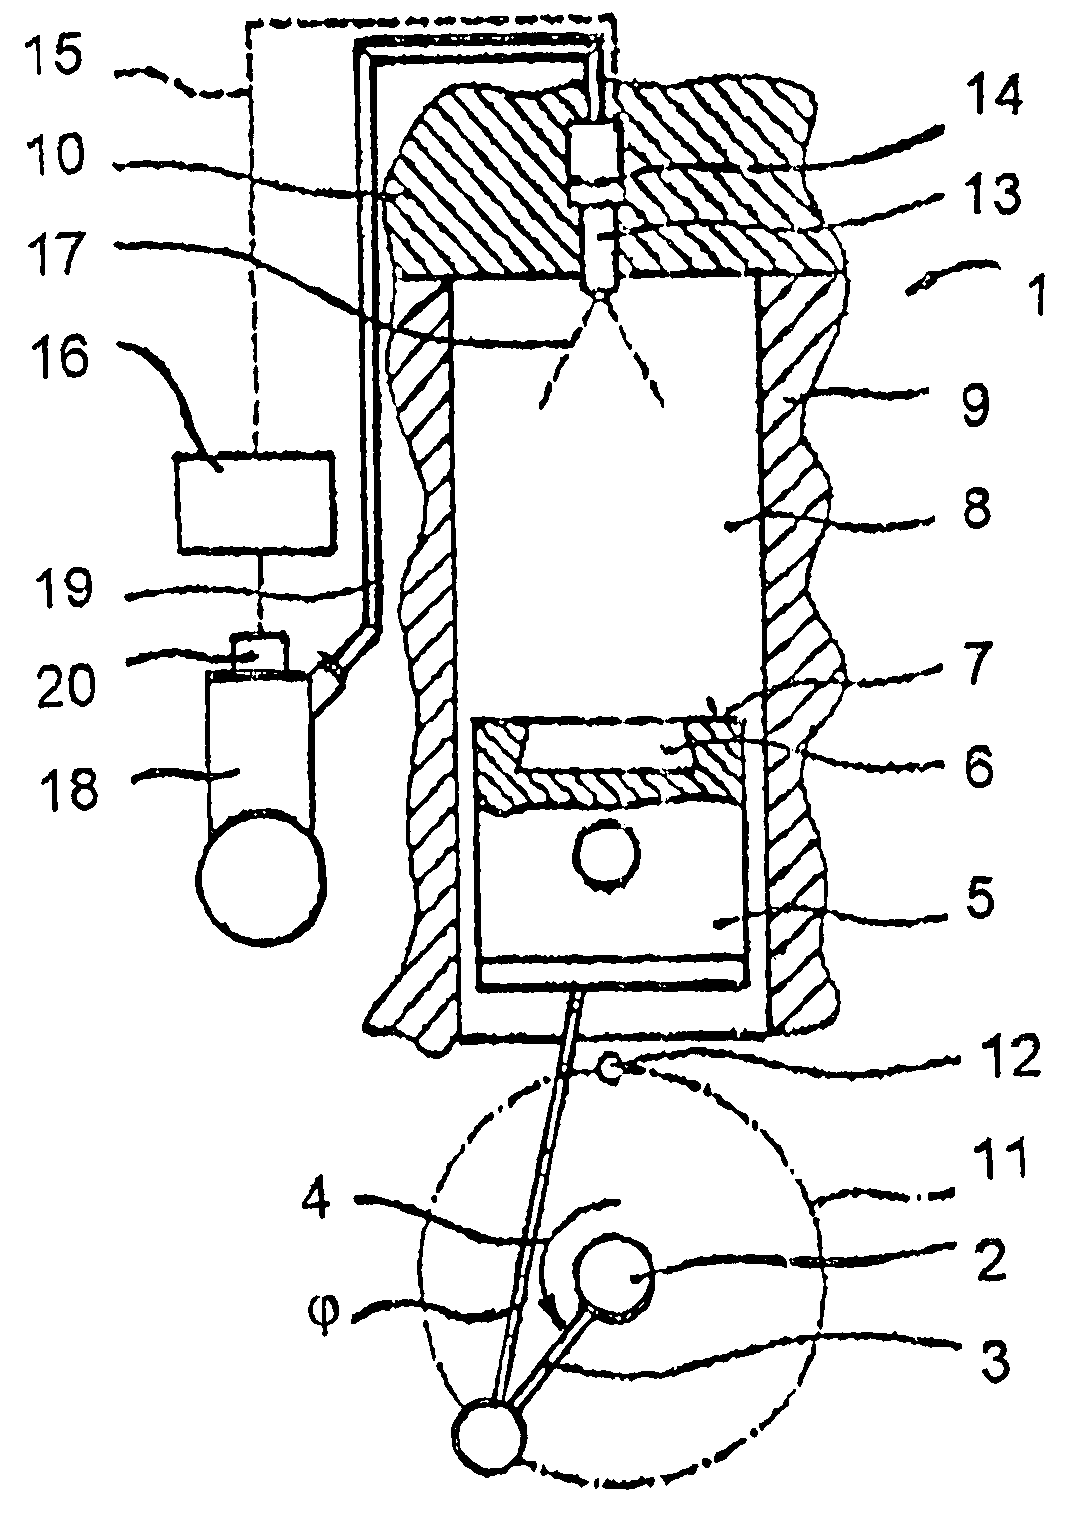 Method of operating an internal combustion engine in an engine warm-up phase